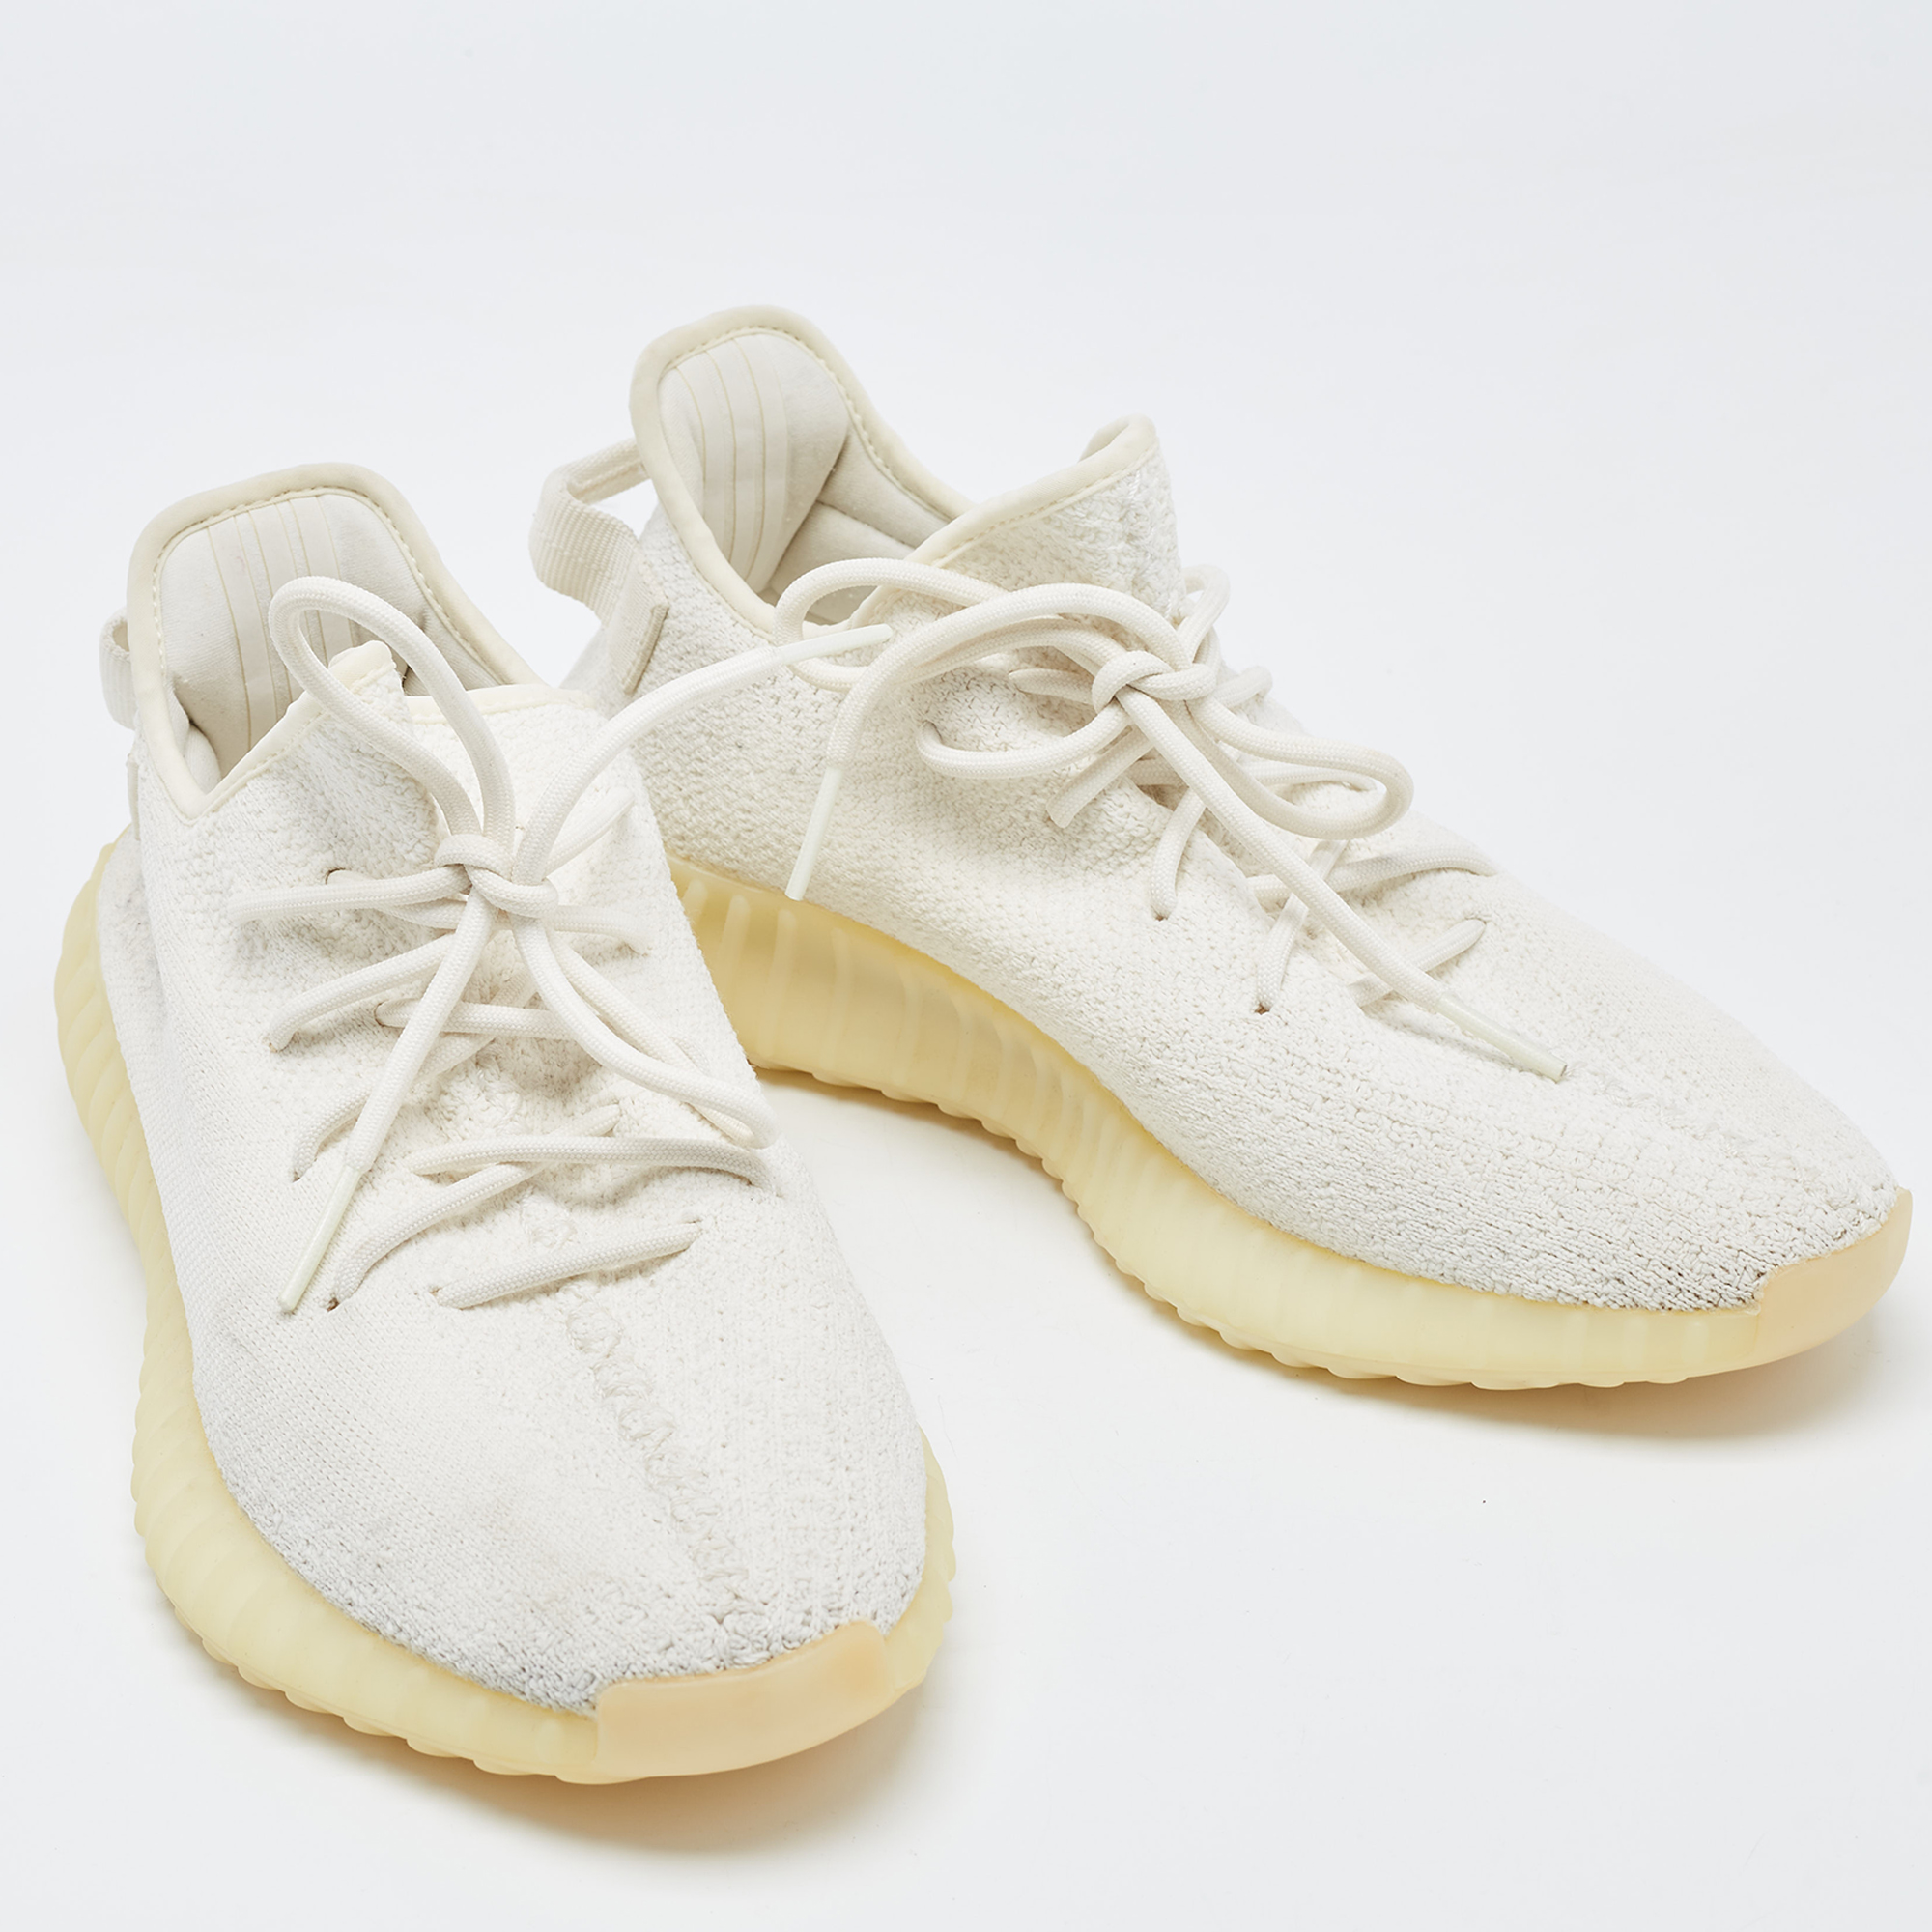 Yeezy X Adidas White Knit Fabric Boost 350 V2 Cream Sneakers Size 46